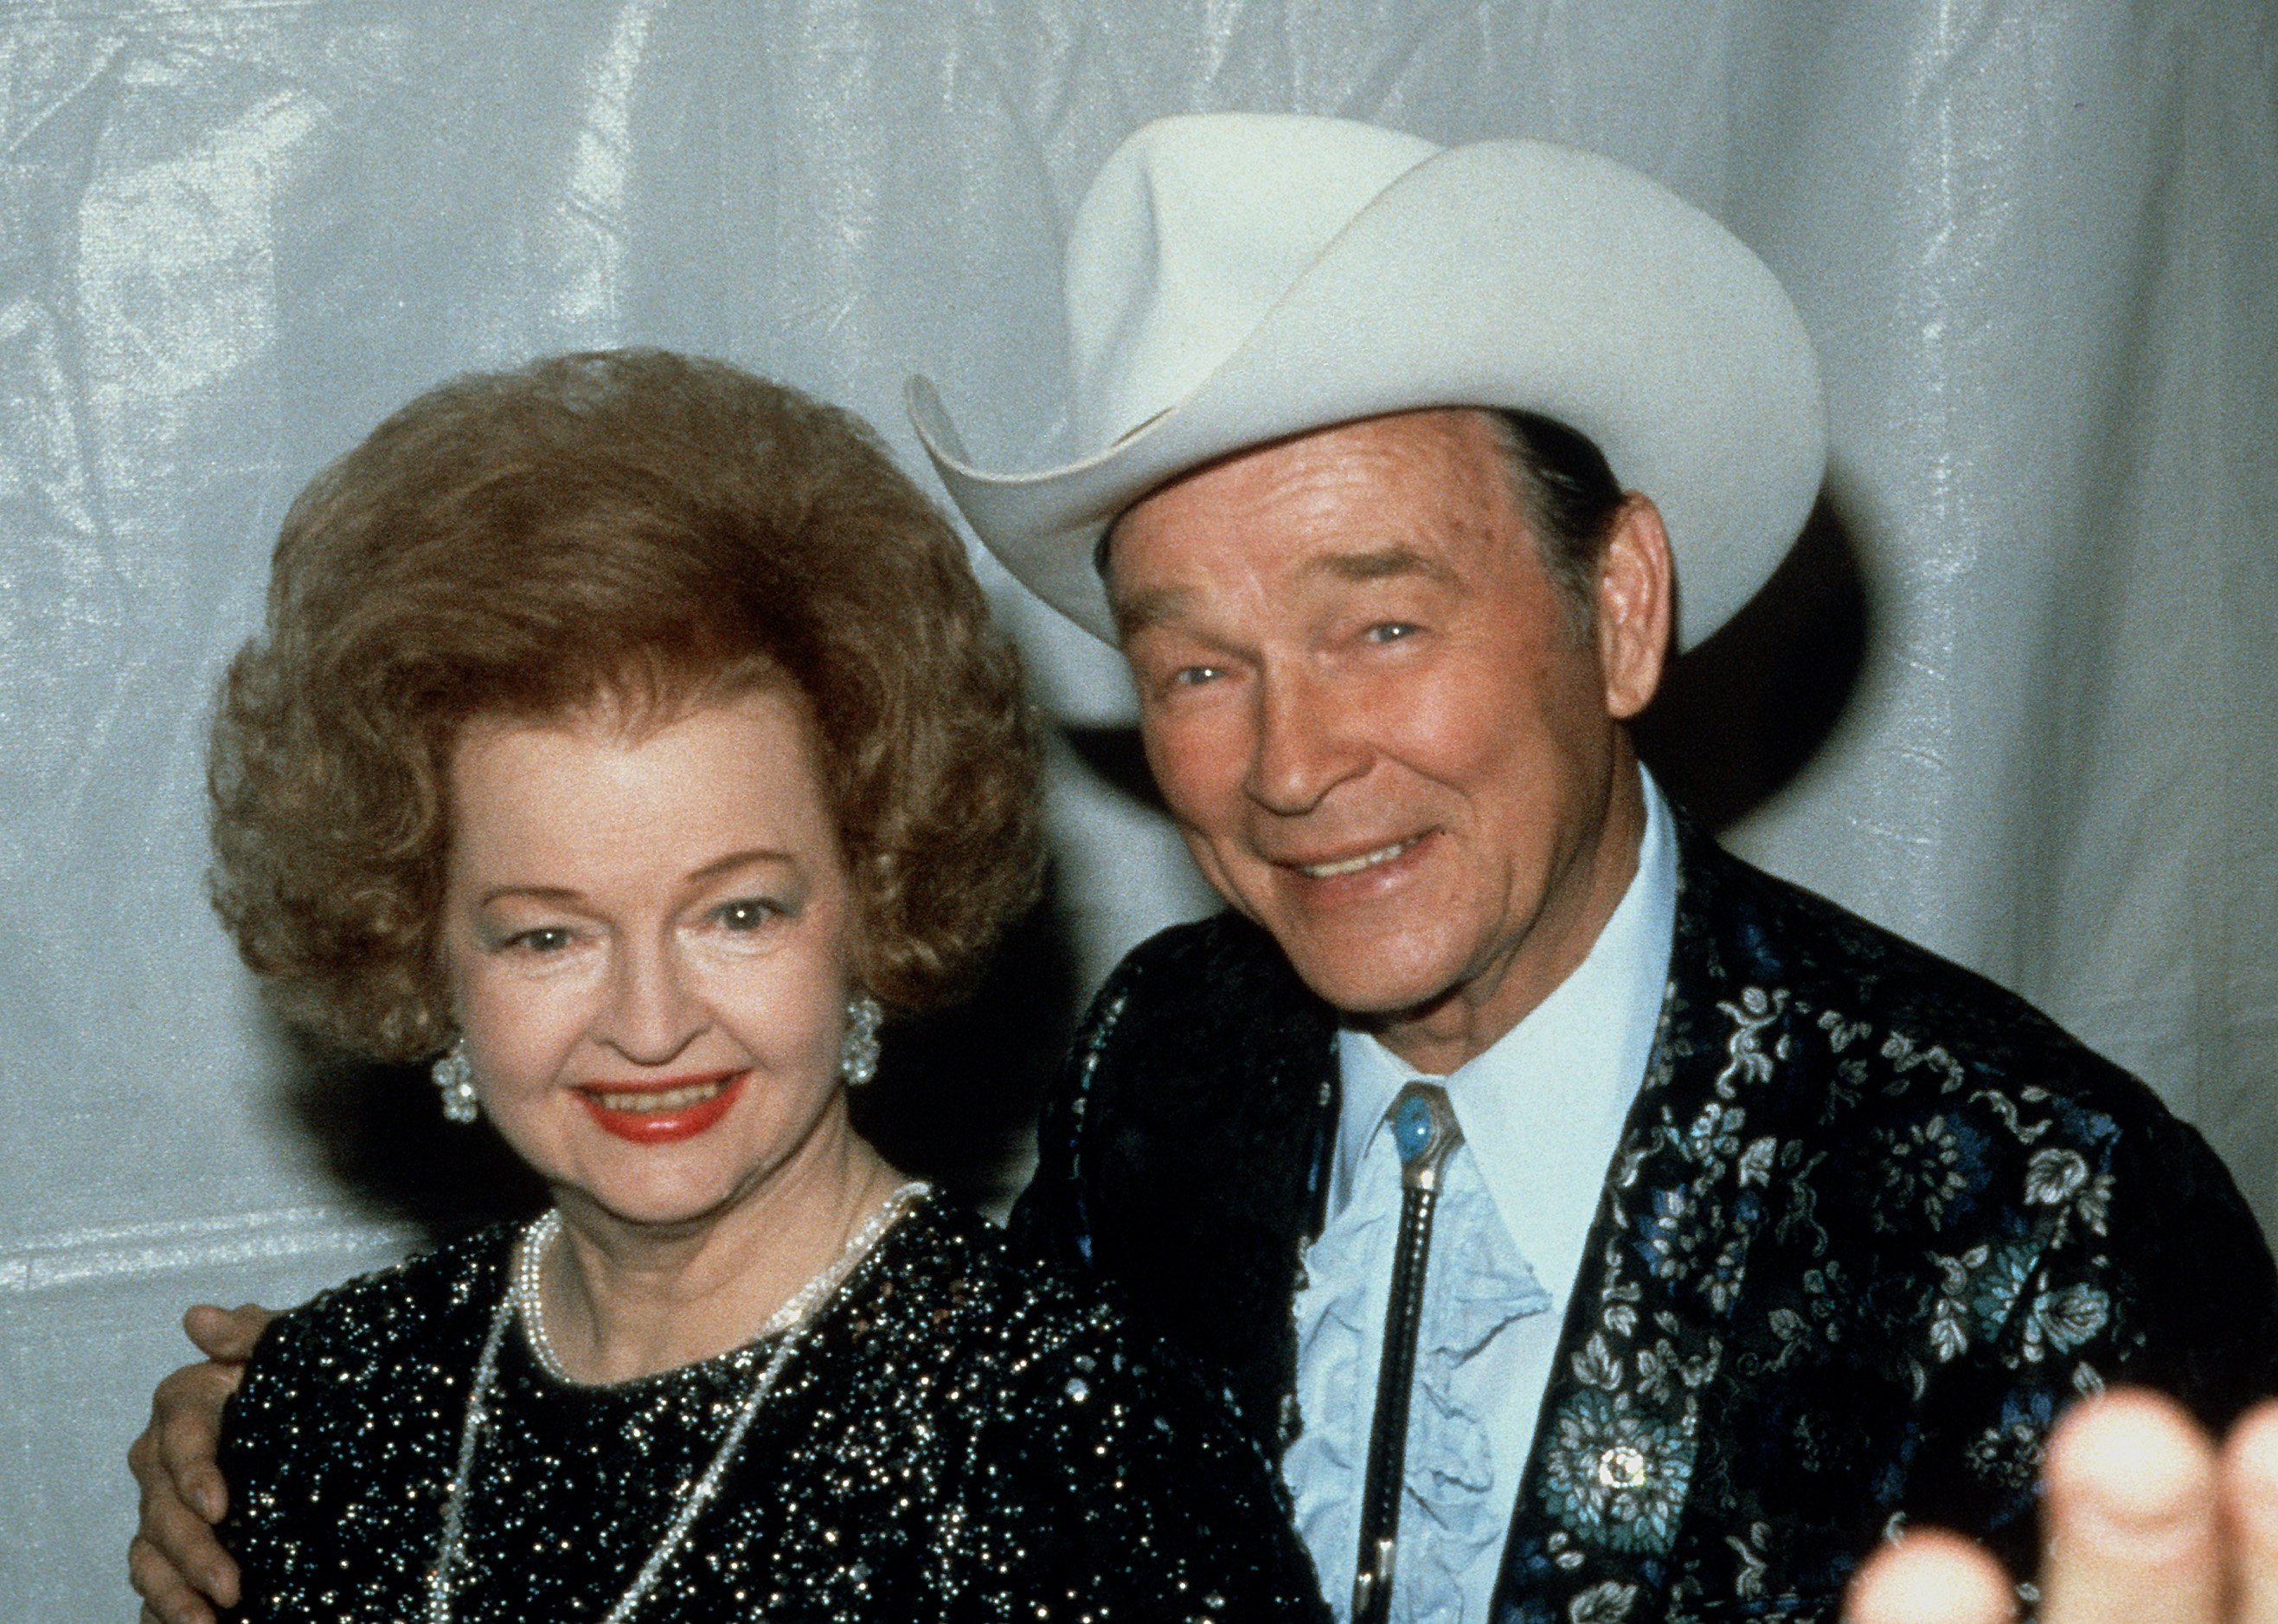 Good and Hard Times of Iconic Couple Roy Rogers & Dale Evans